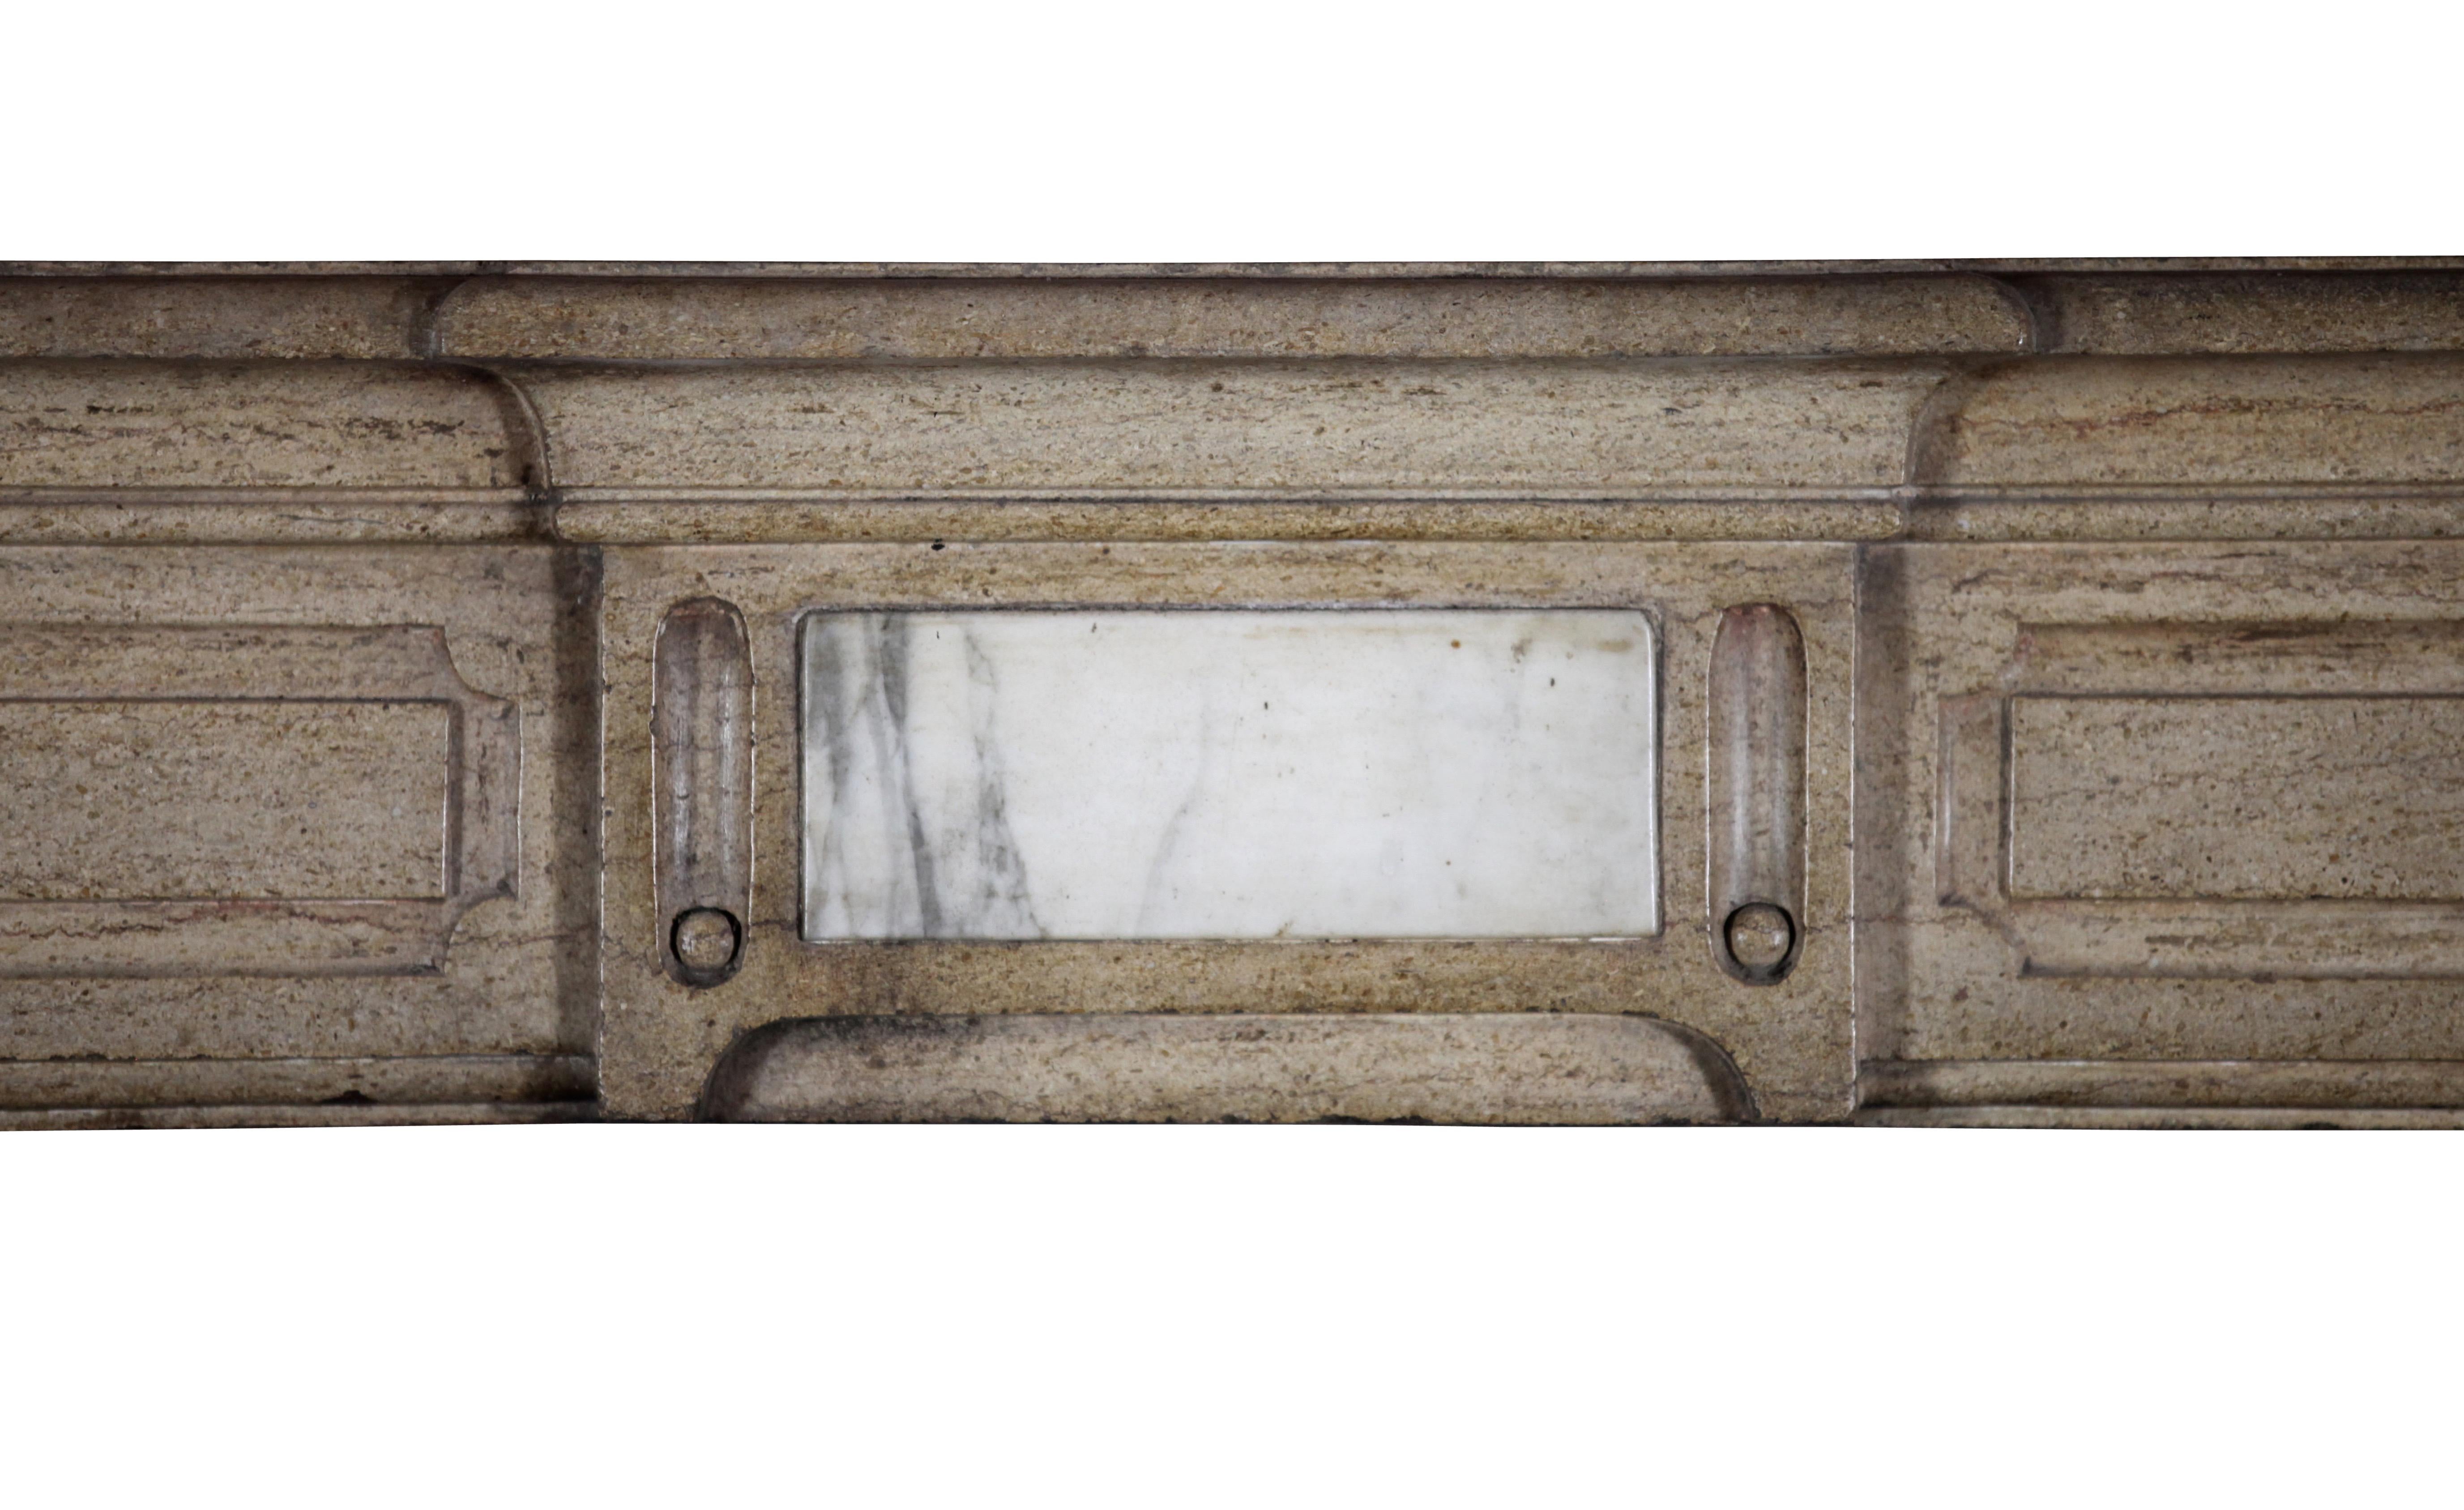 A dine French, burgundy hard stone vintage mantel with marble inlay. It has the typical flower motif on the jambs of the Art Deco period, early 20th century.
Measures:
174 cm exterior width 68.50 inch
111 cm exterior height 43.70 inch
145 cm